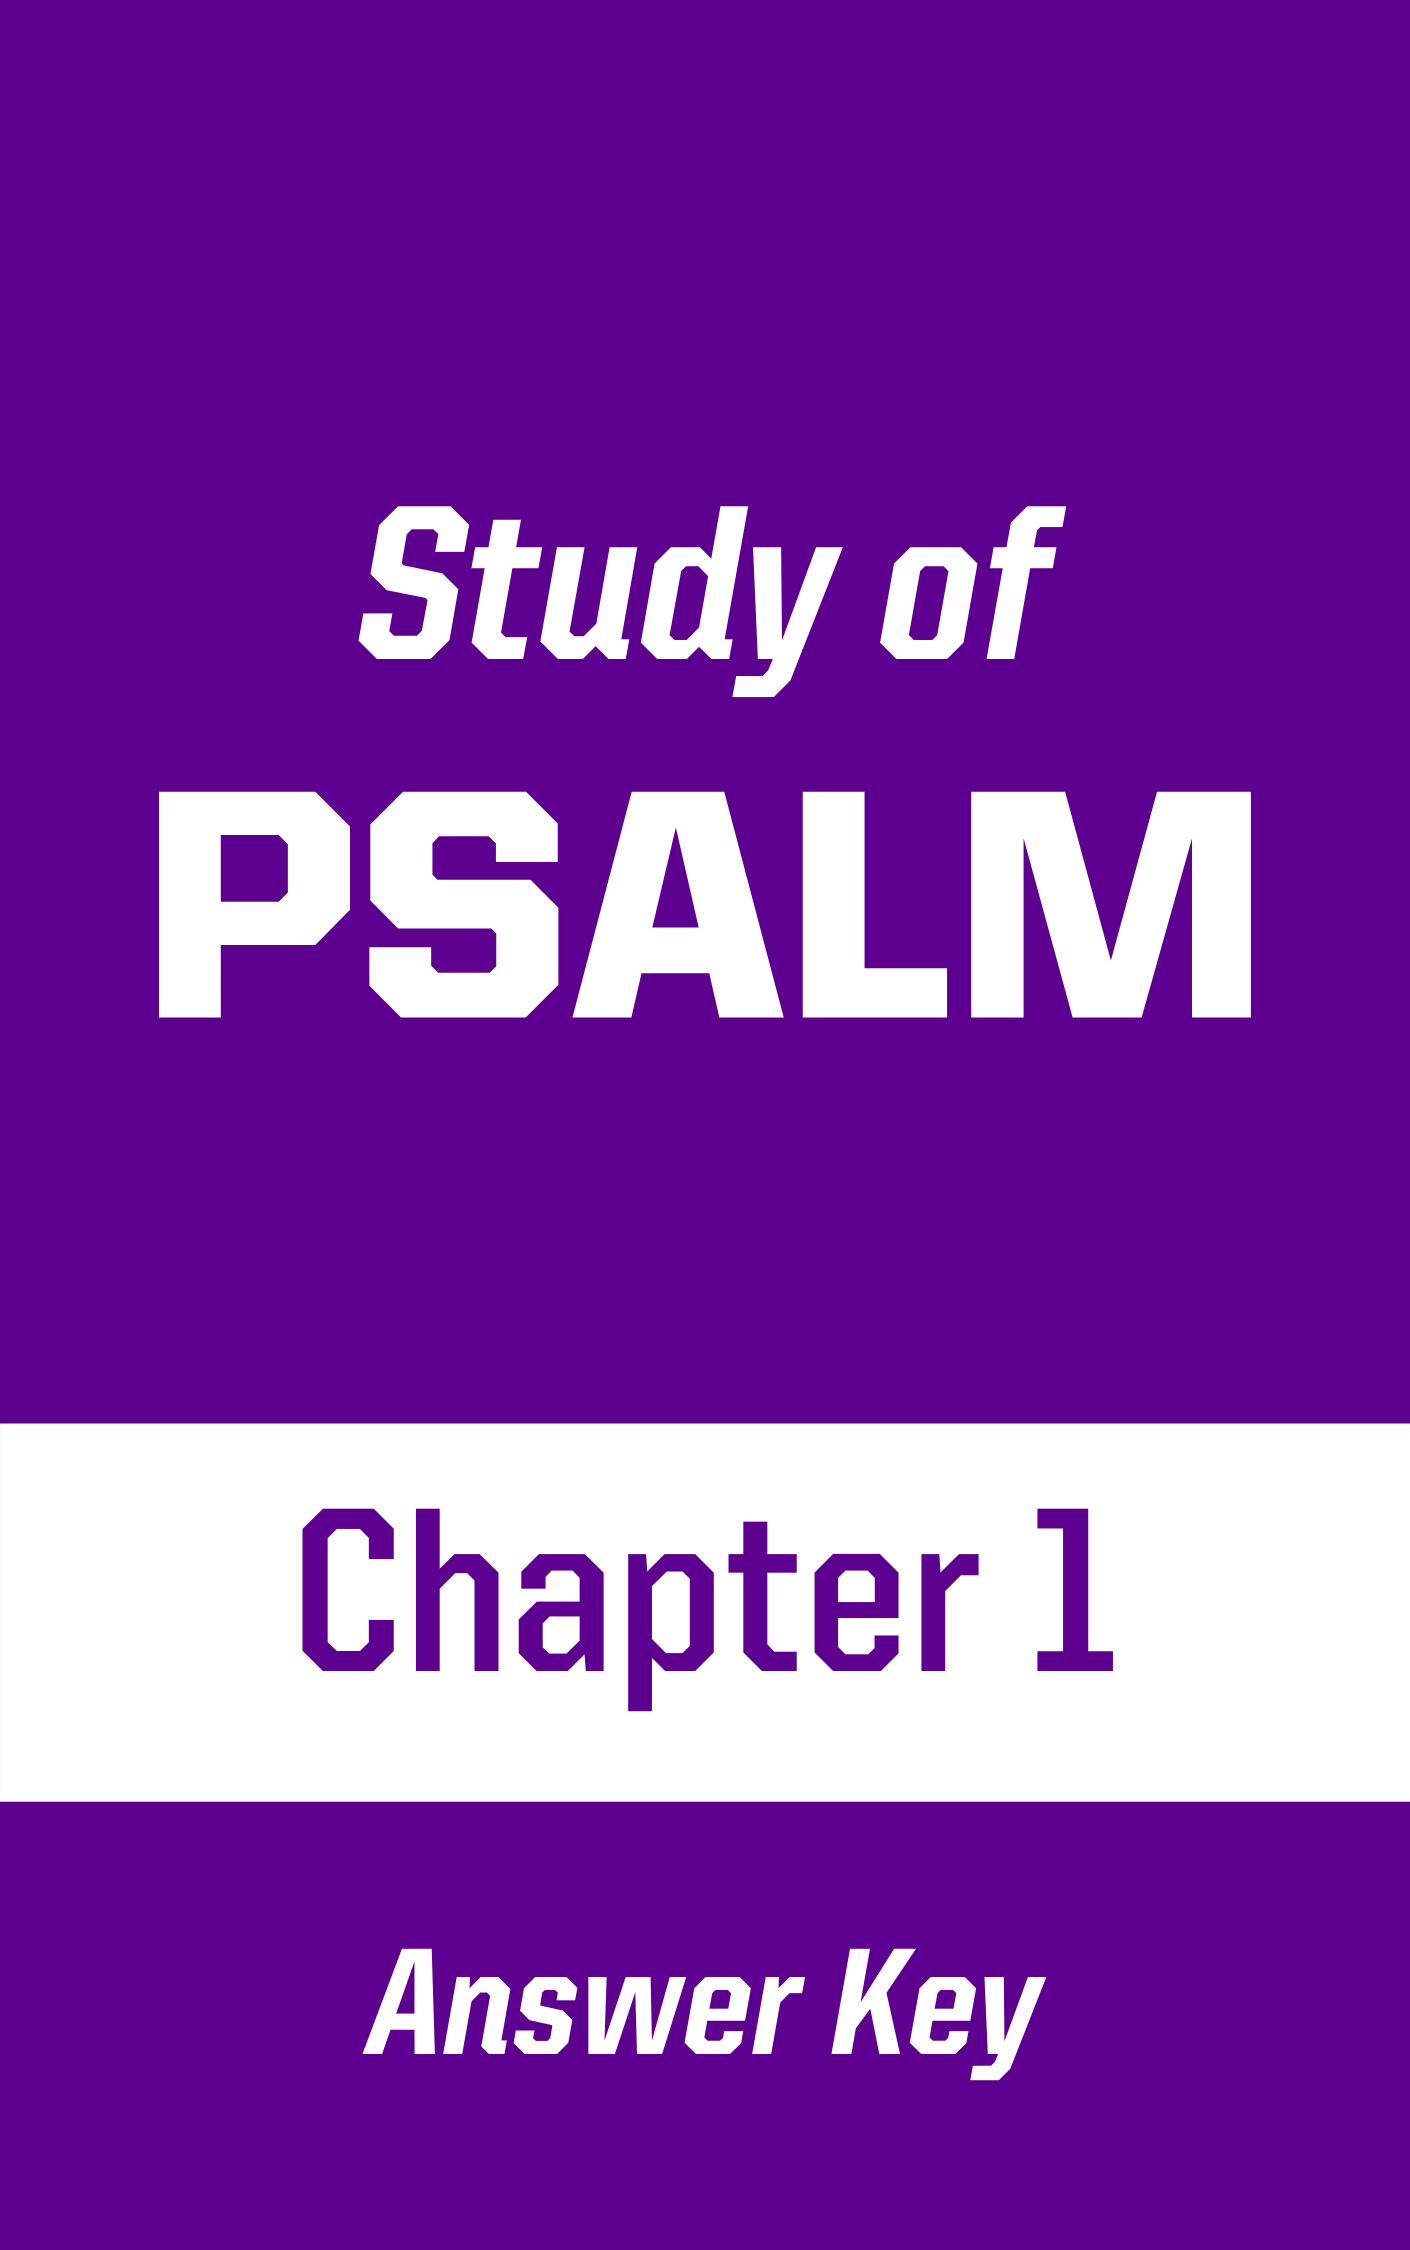 PSALMS (1).png